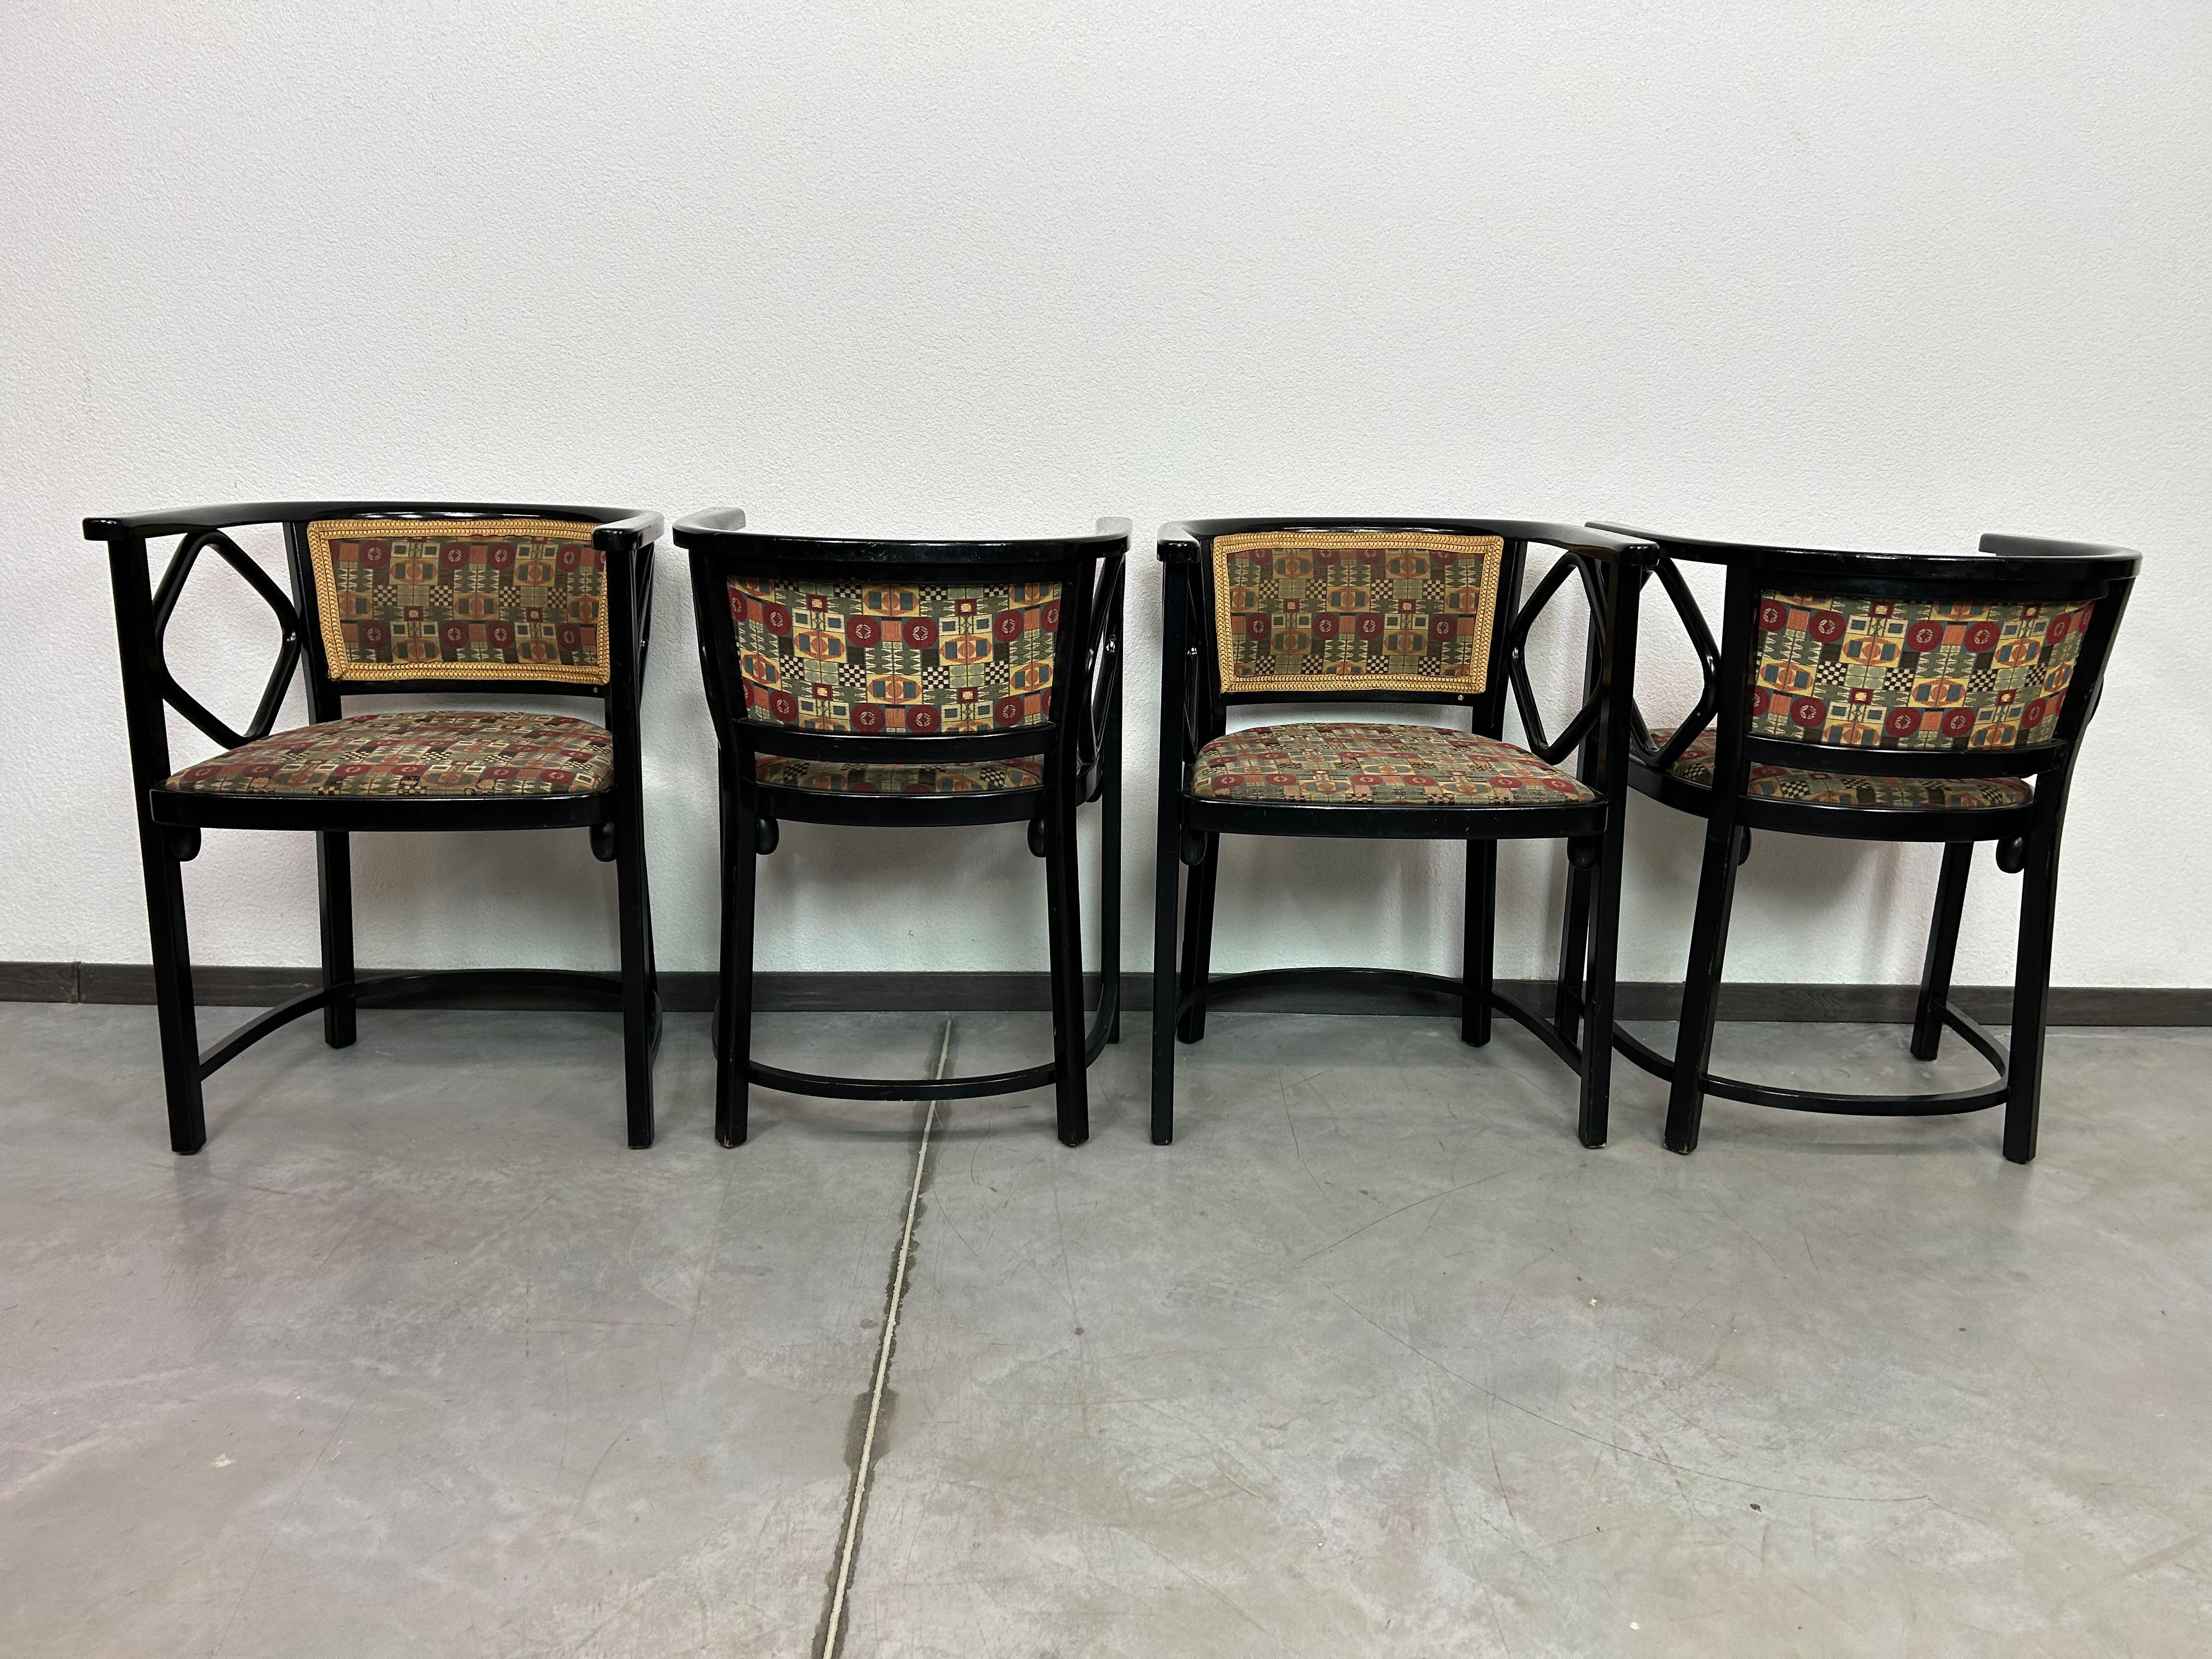 Set of 4 Fledermaus chairs by Josef Hoffmann for Thonet in very nice original condition with signs of use. Later limited edition by Thonet Vienna from 1985, signed.